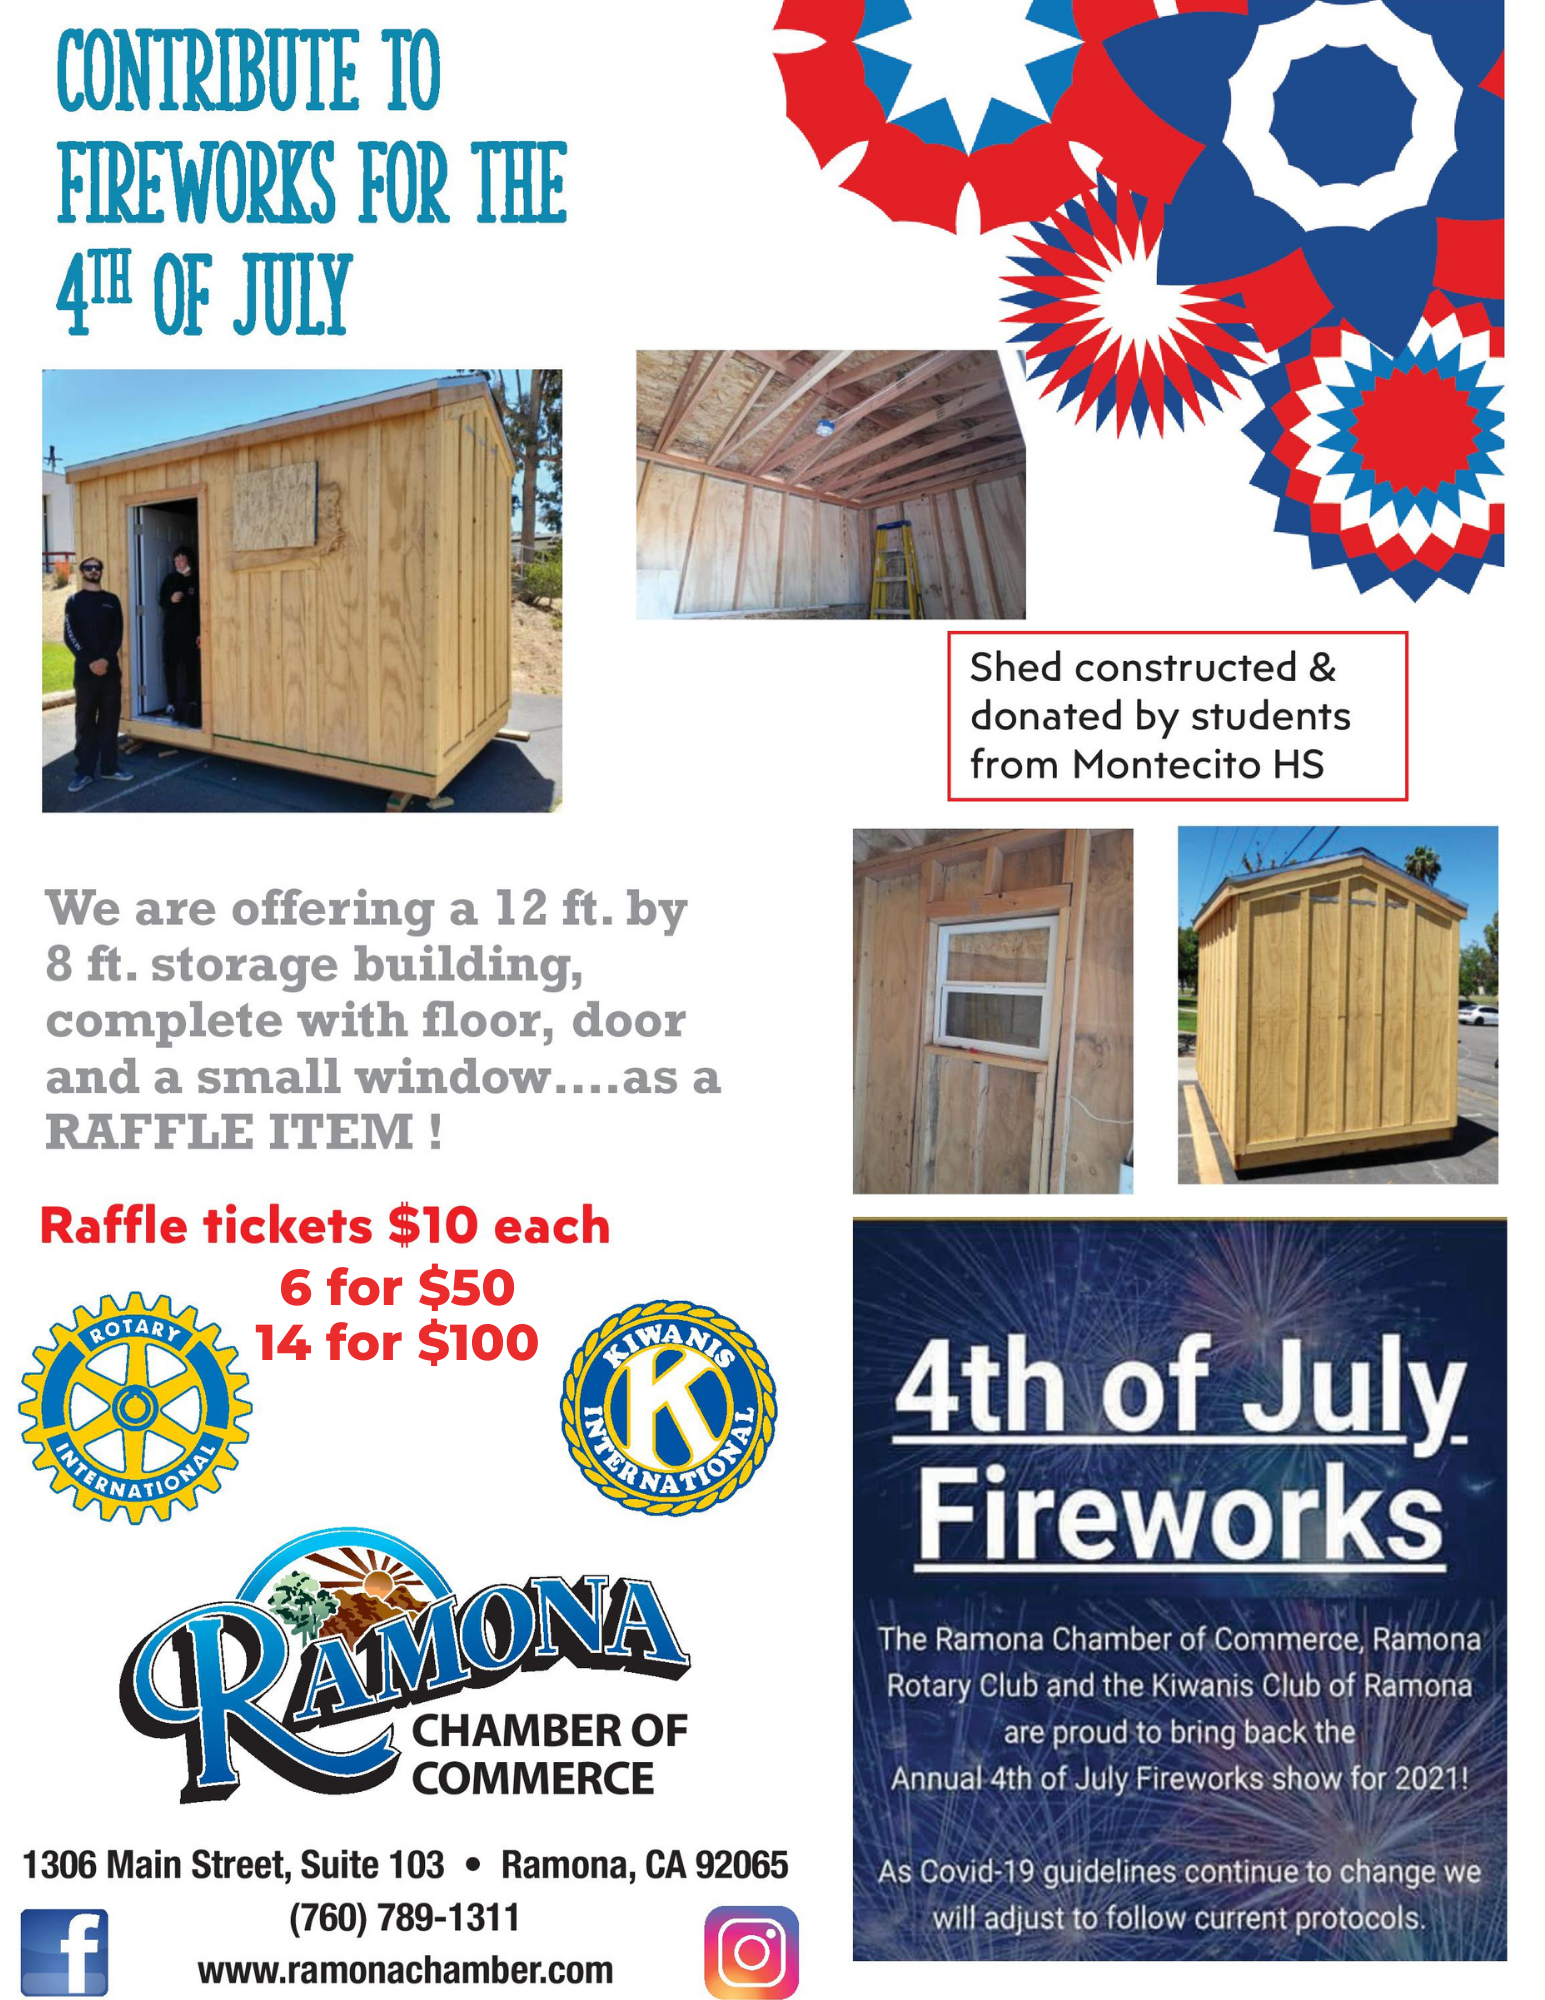 National Day of the Cowboy 2021 - shed raffle donations go to Ramona Fireworks